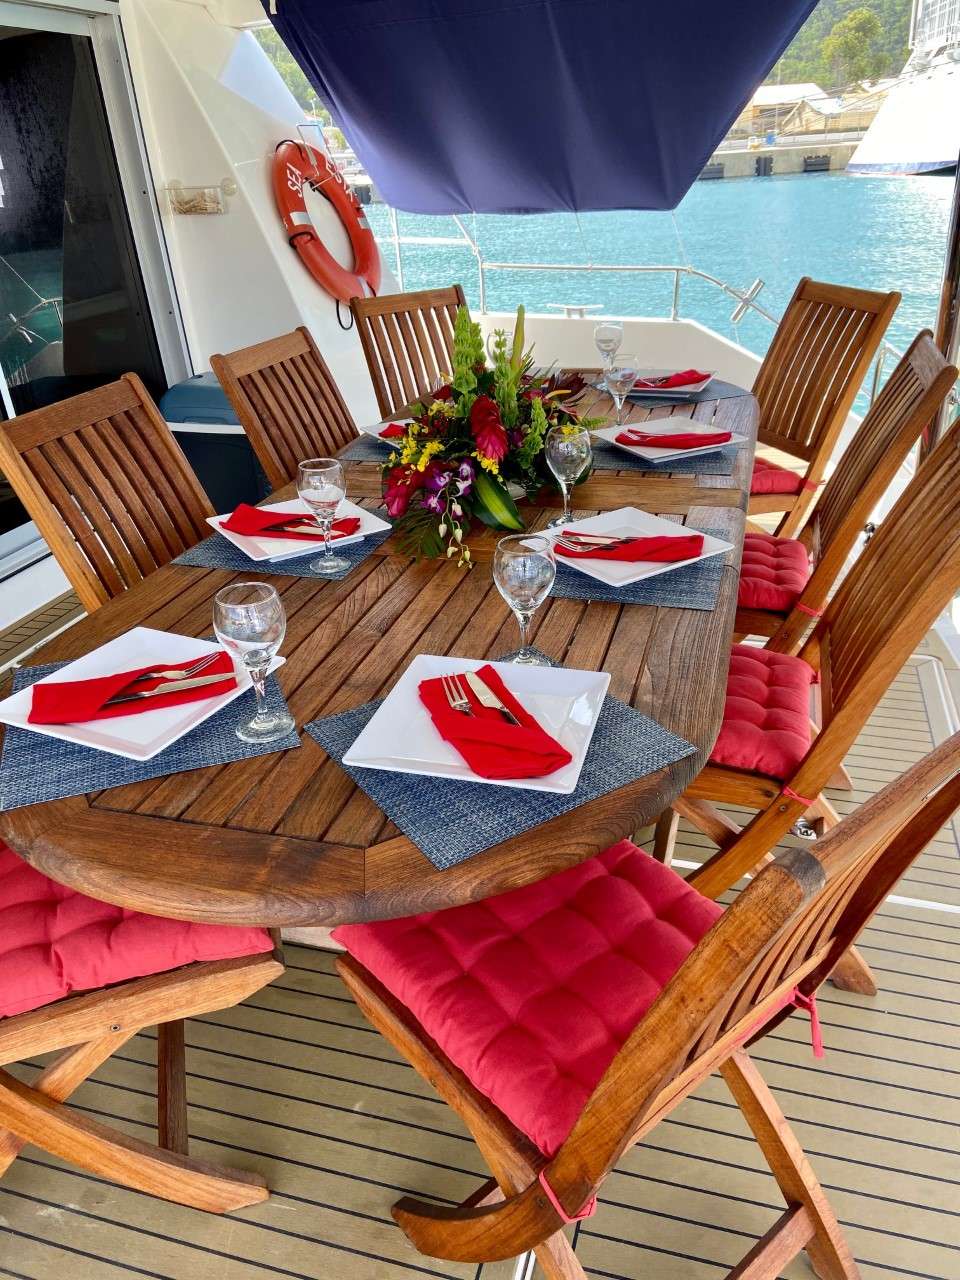 SEA ESTA Yacht Charter - Alfresco dining for up to 10 on the open aft deck.